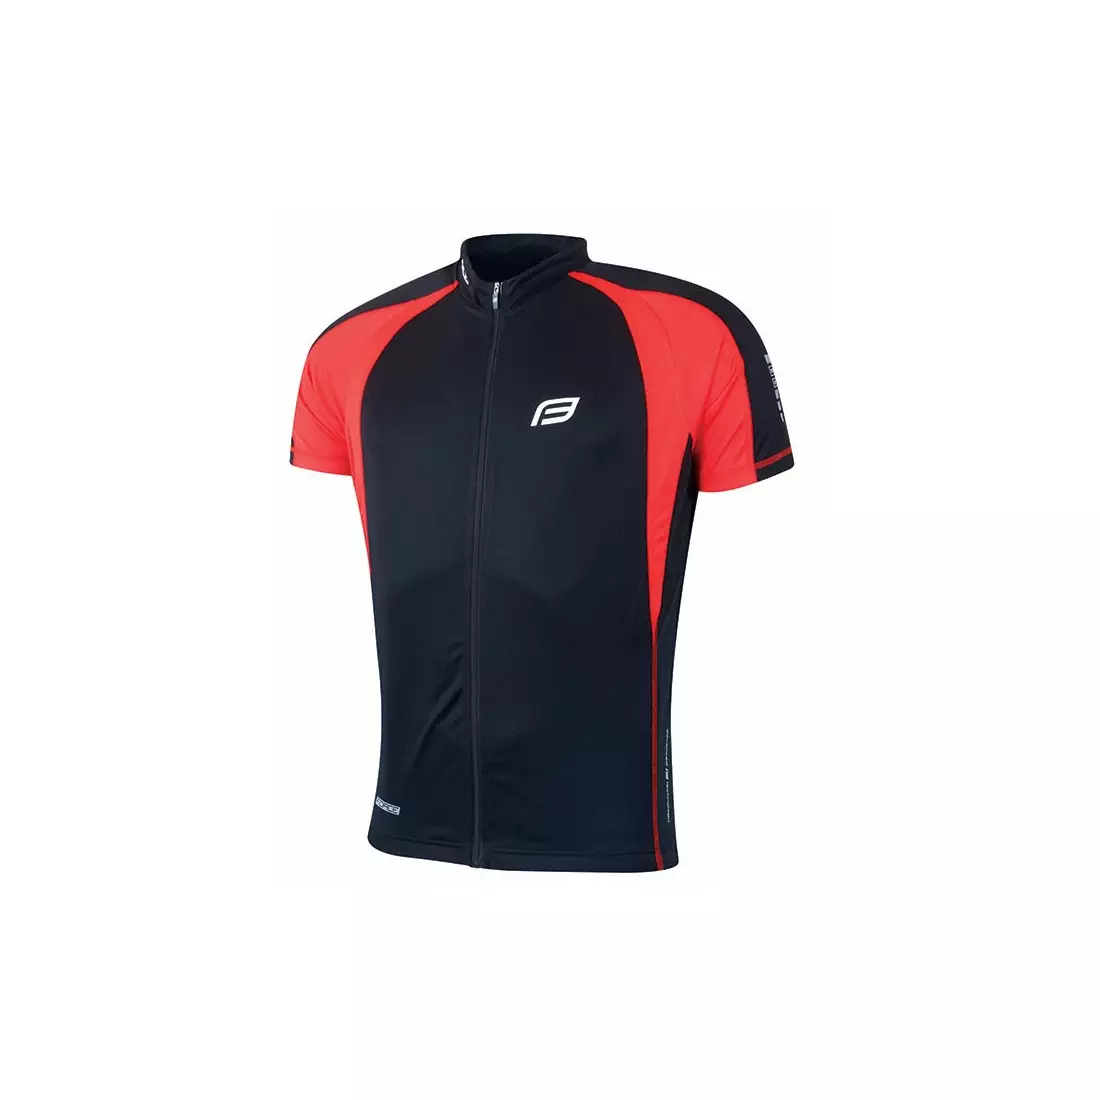 FORCE T10 cycling jersey, black and red 900102